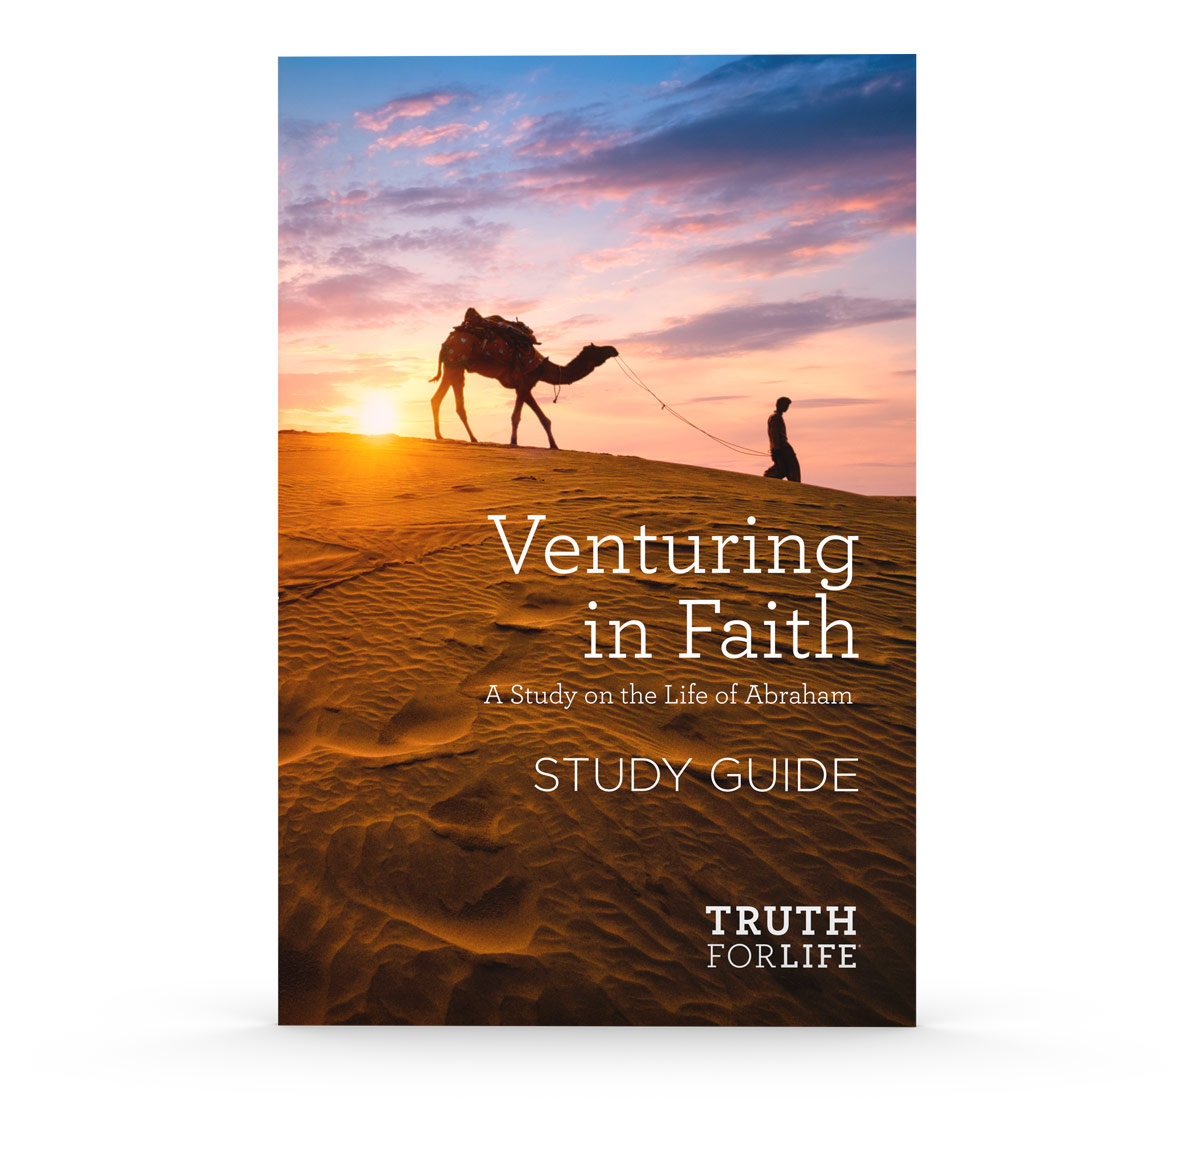 ‘Venturing in Faith’ Study Guide